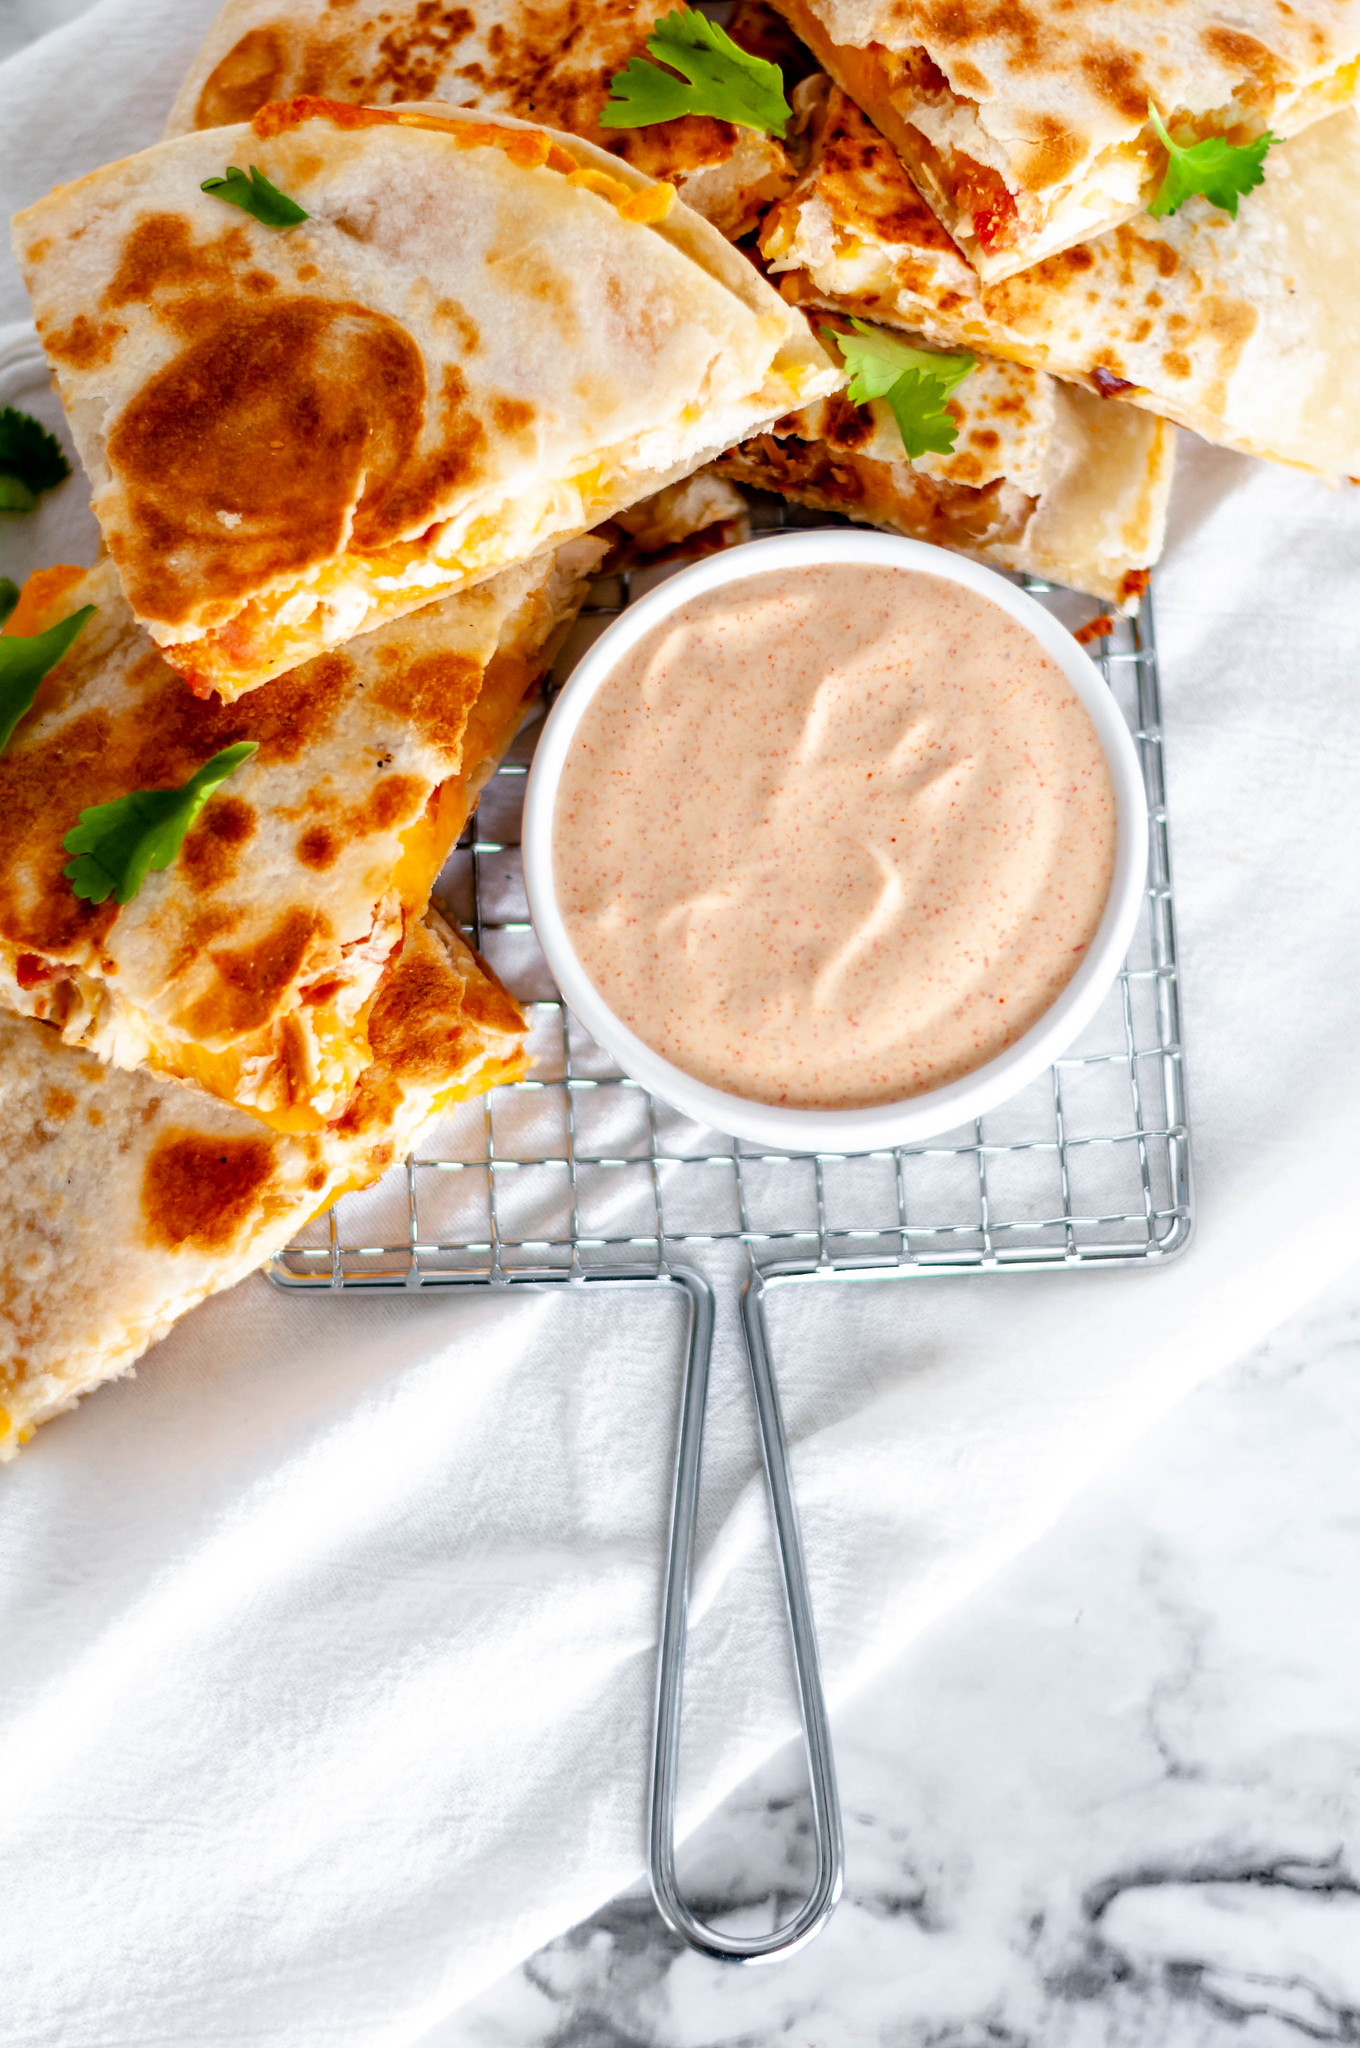 This copycat Taco Bell Quesadilla Sauce is just like the real deal and so simple to make at home. Spice up your favorite quesadilla with this yummy sauce.